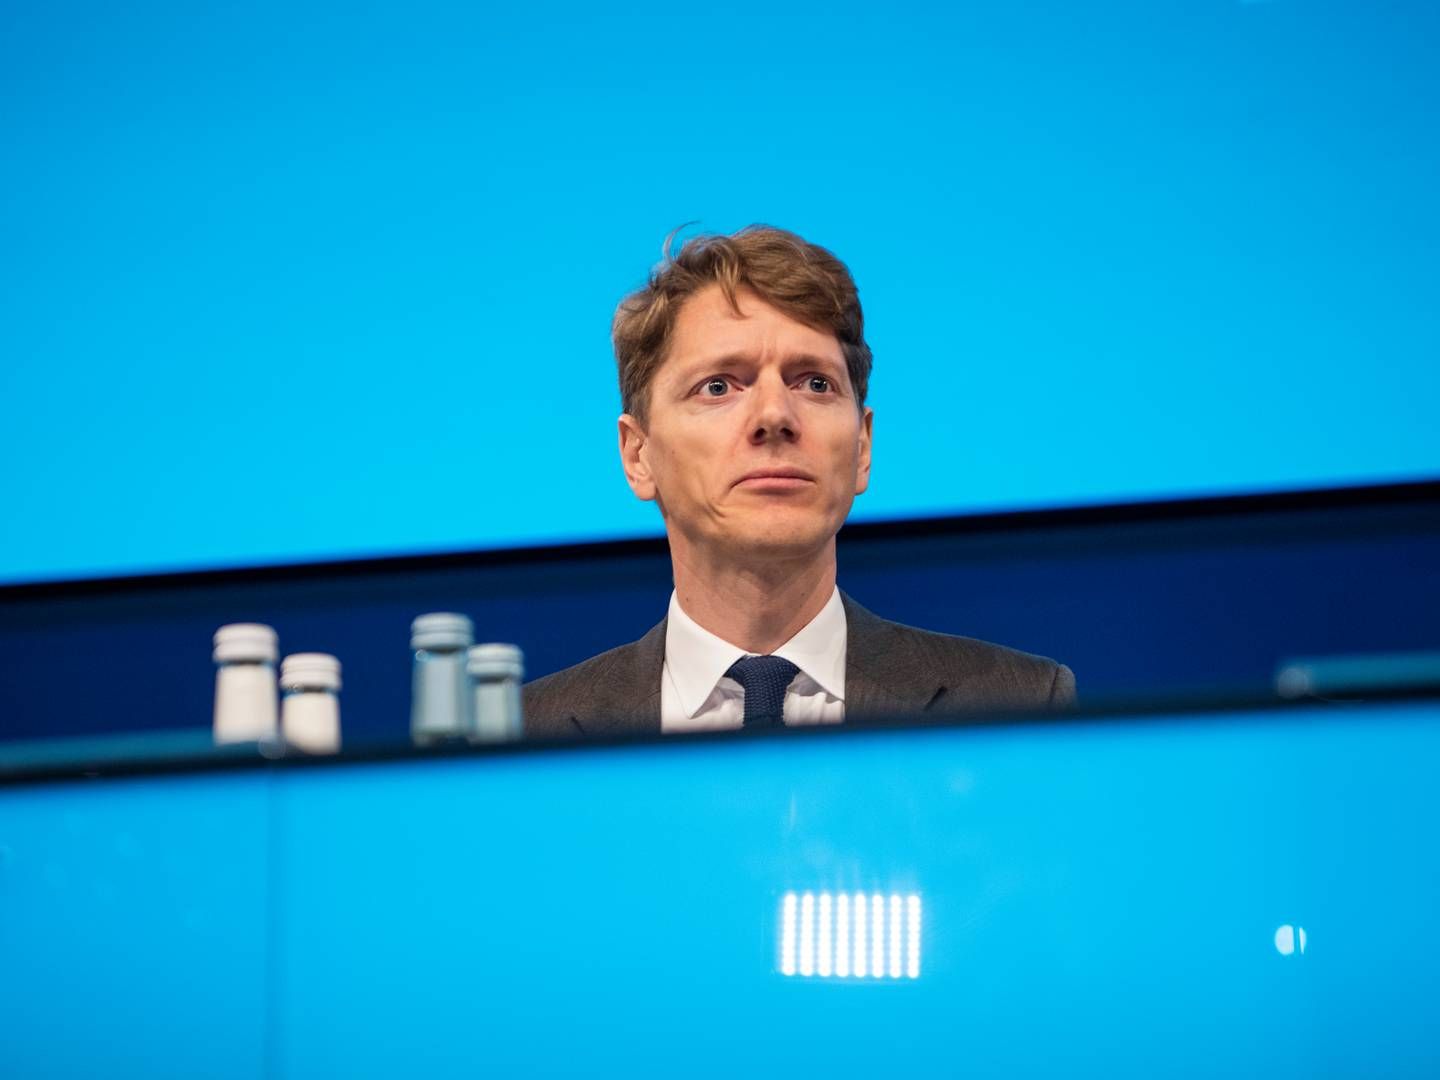 Maersk, which has Robert Maersk Uggla as chairman of the board, will now have to pay an extra tax bill stemming from the North Sea oil adventure initiated by Uggla's late grandfather, Maersk Mc-Kinney Moller. | Photo: Gregers Tycho